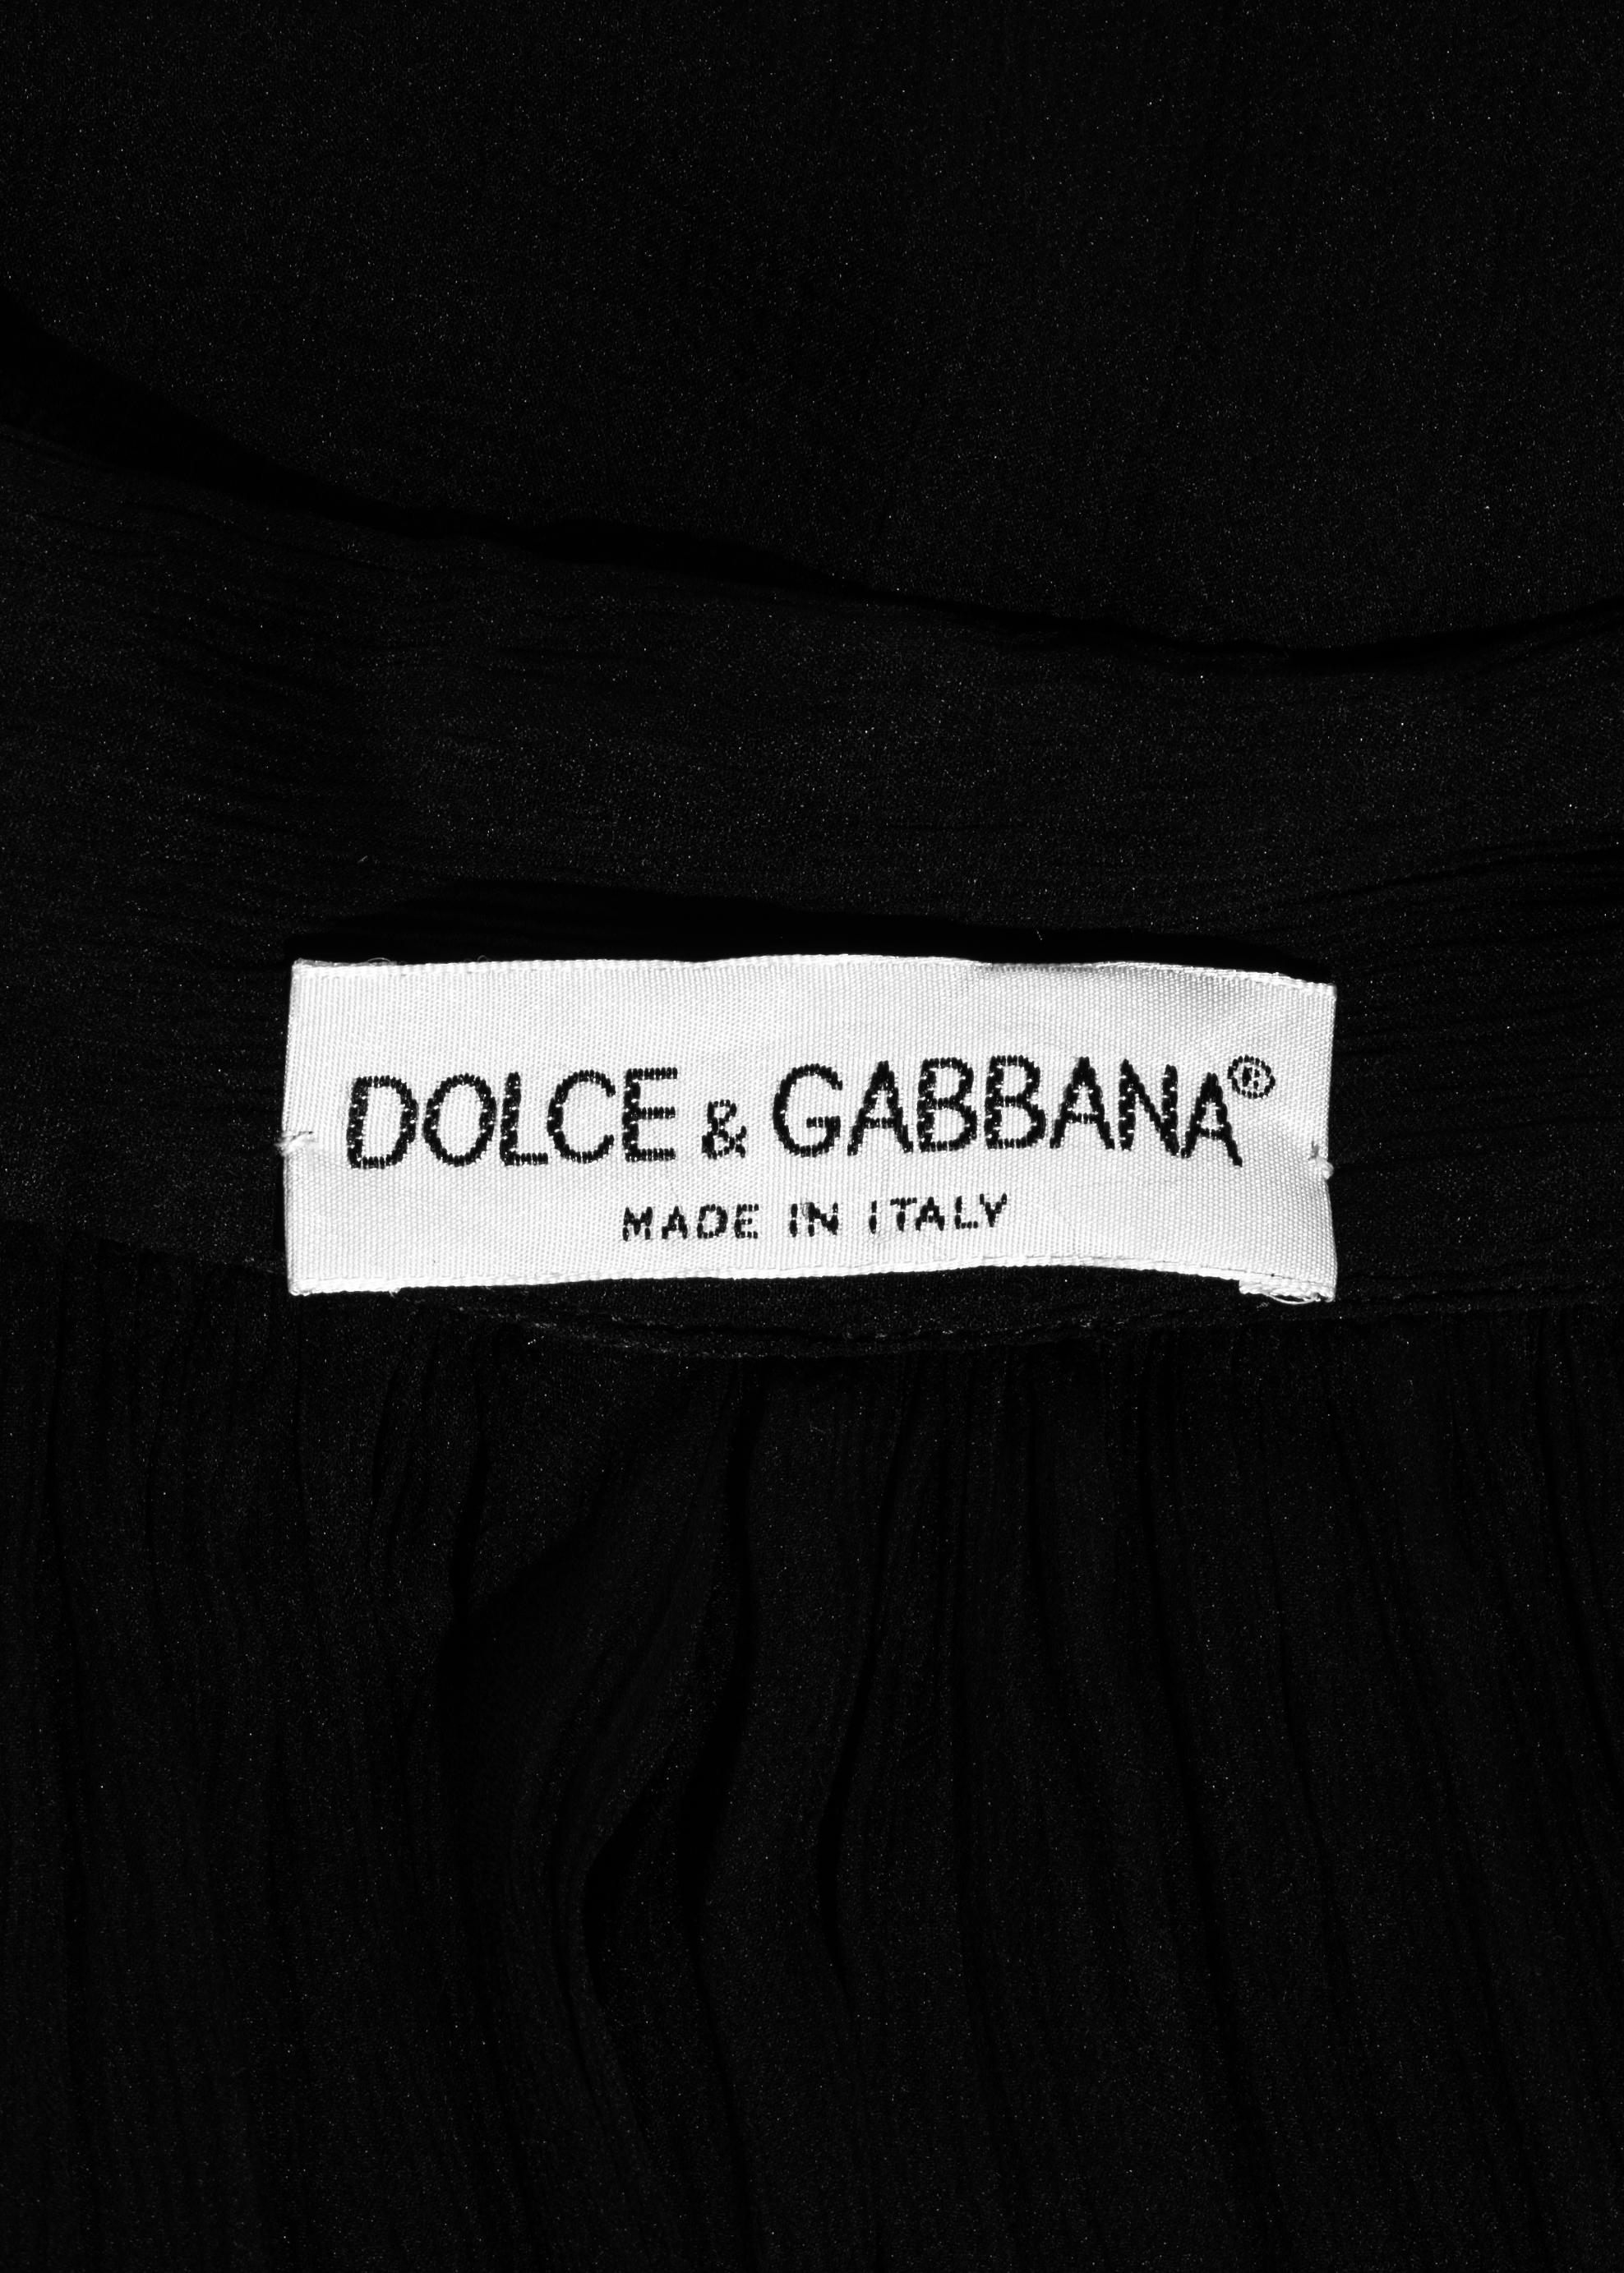 Dolce & Gabbana black silk top and bustled skirt with fringed trim, fw 1993 3